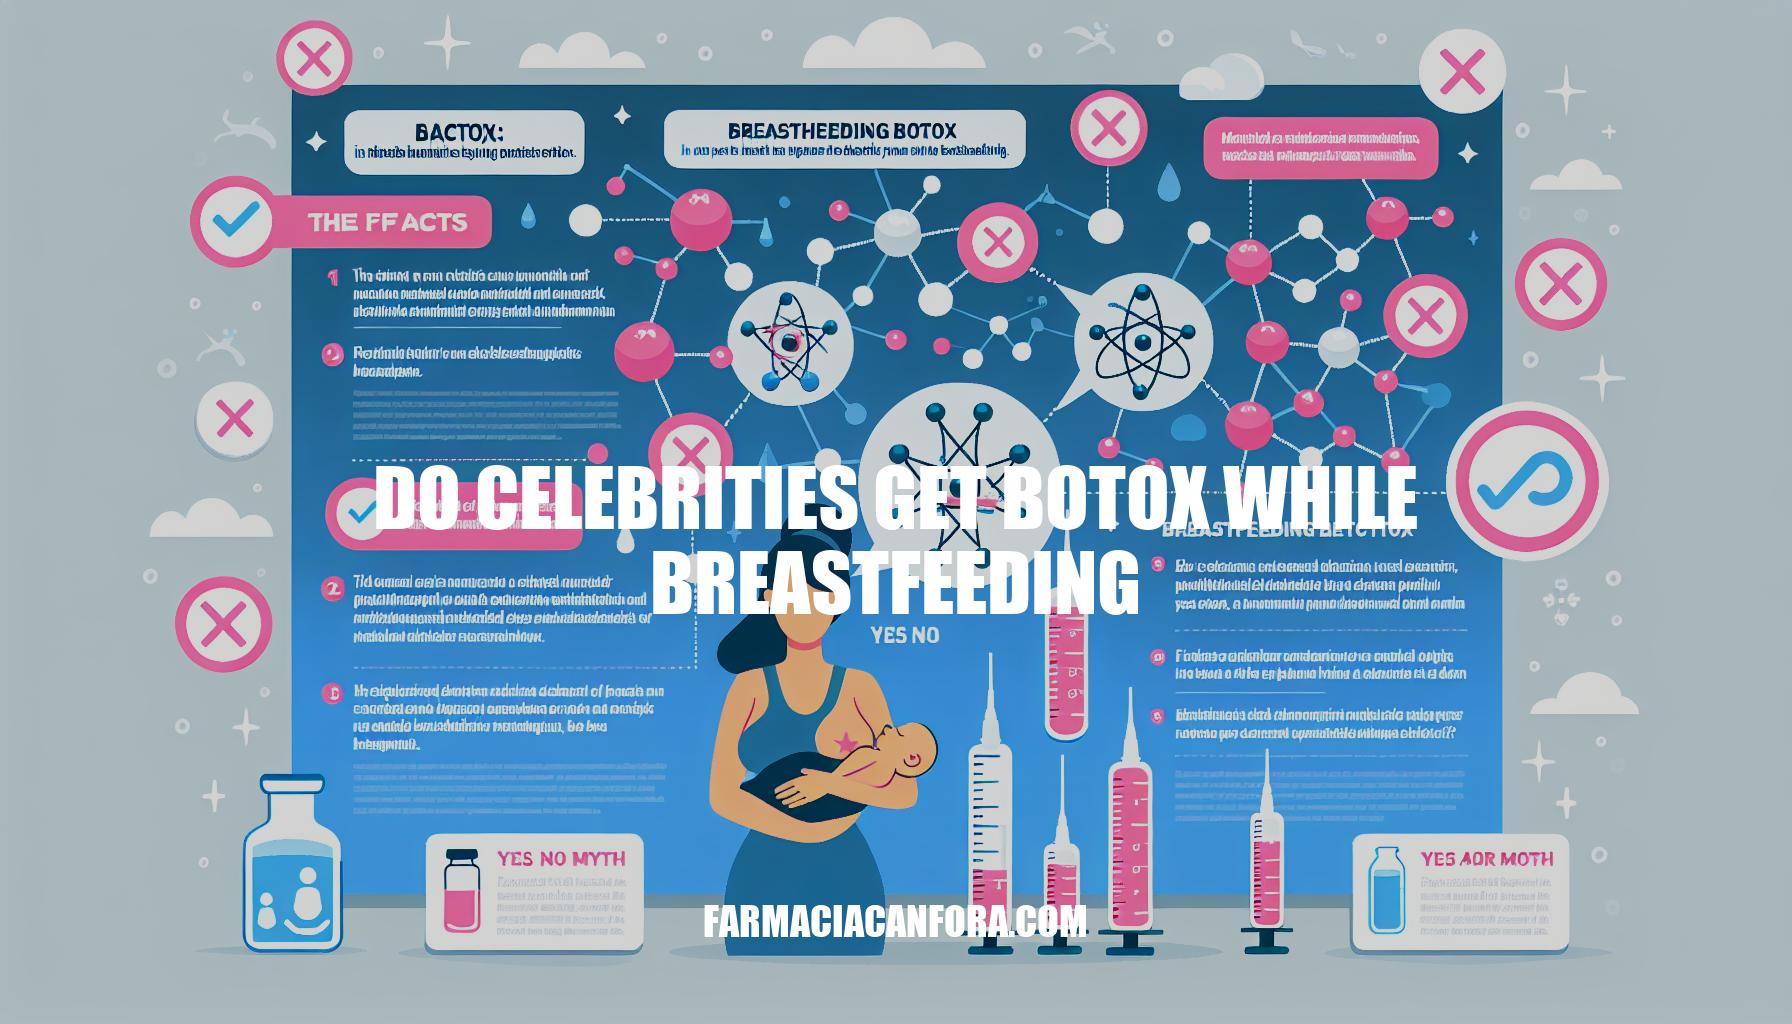 Do Celebrities Get Botox While Breastfeeding: Facts and Myths